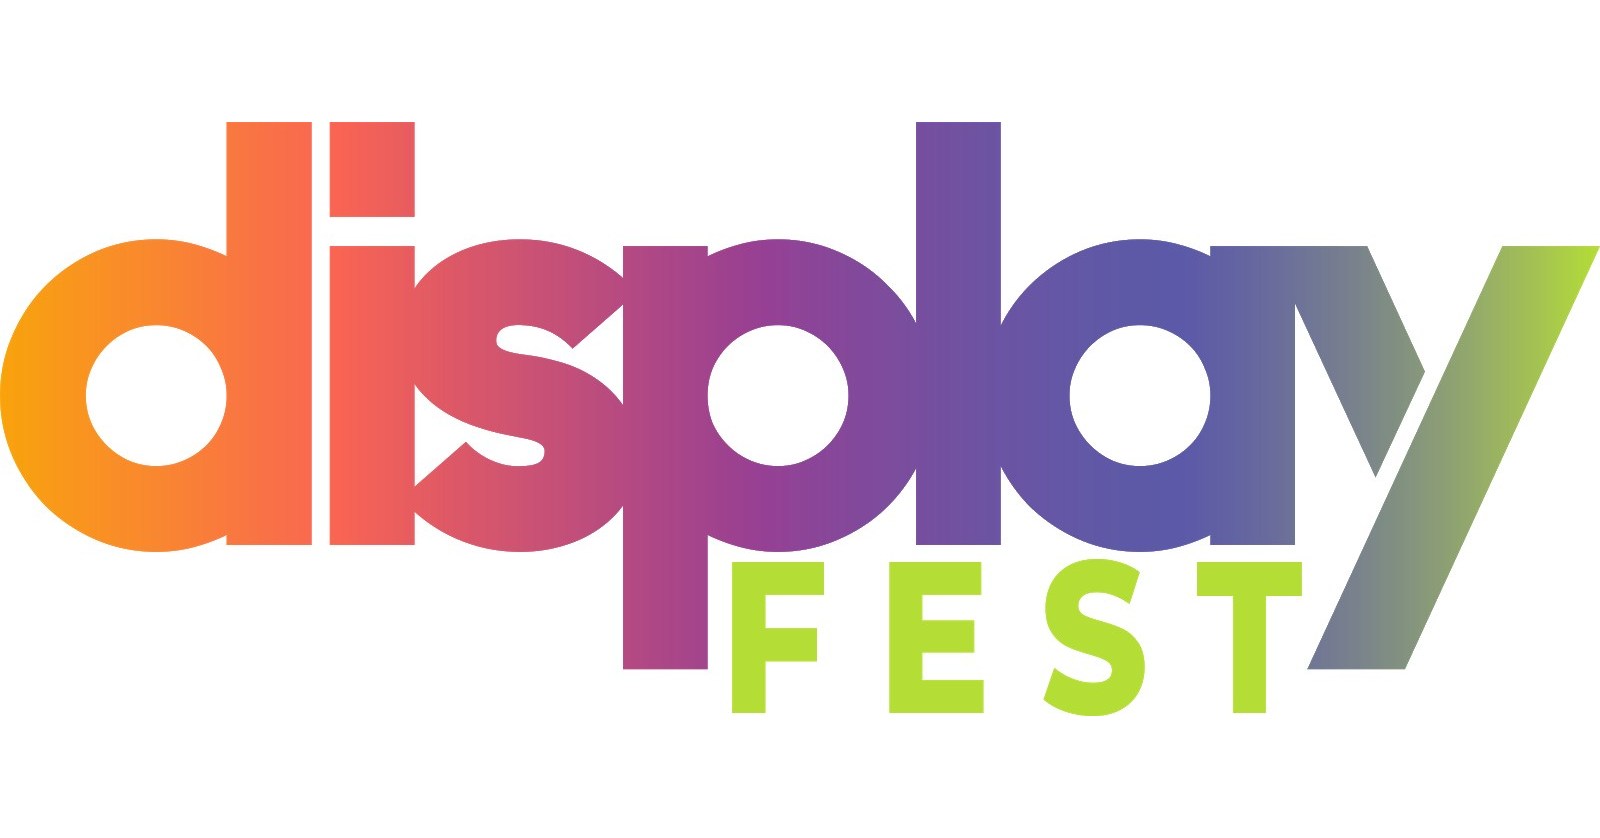 Display The Social That Pays Announces Displayfest To Kick Off Consumer Launch With A Month Of Free Live Concerts And 2 Million In Trivia Cash Prizes